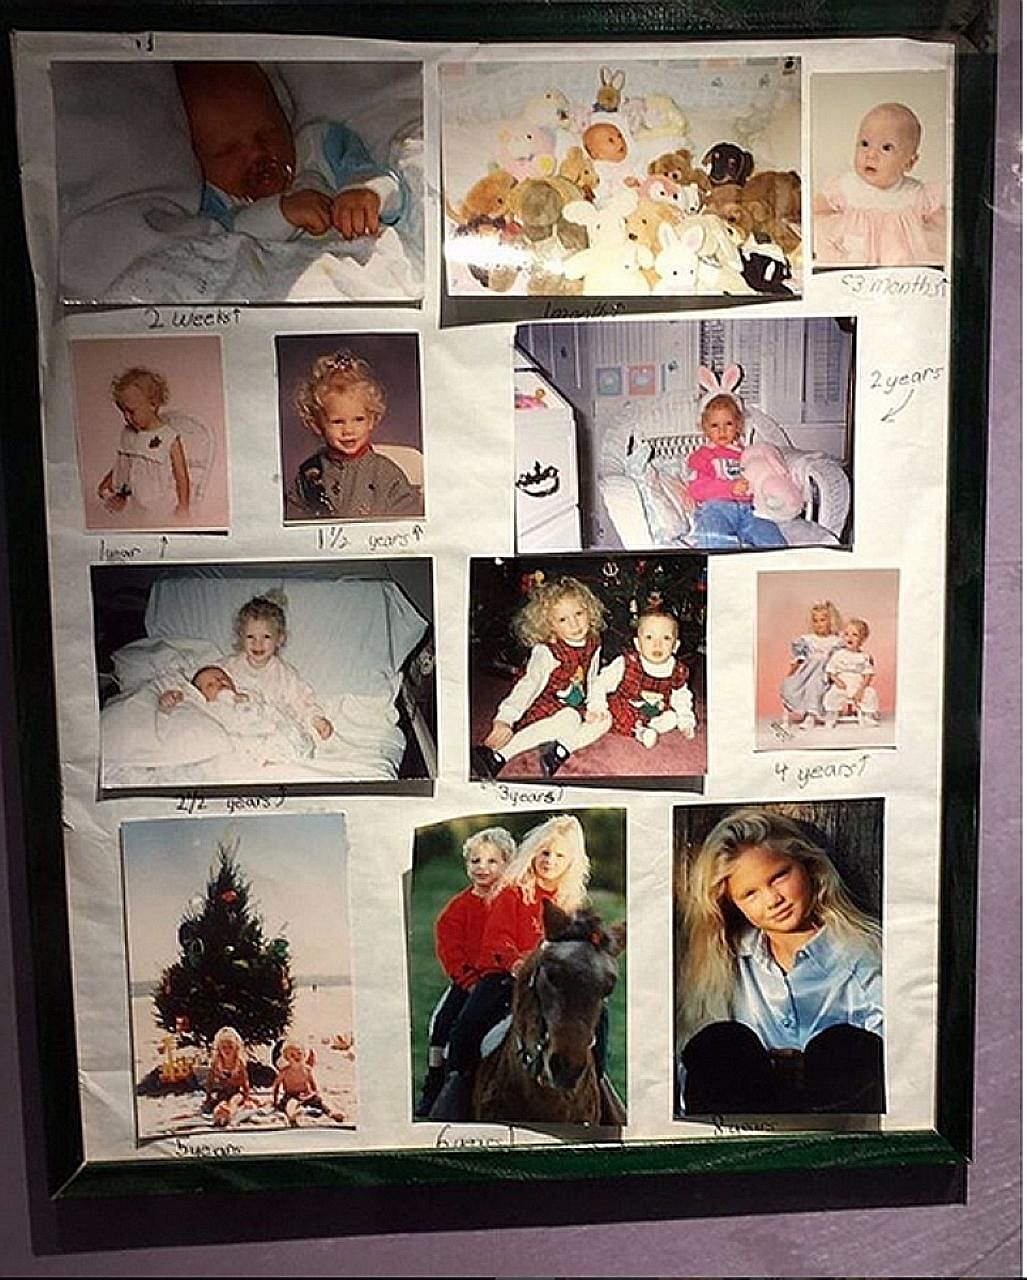 Photos of singer Taylor Swift from ages one to eight are included in the exhibition.